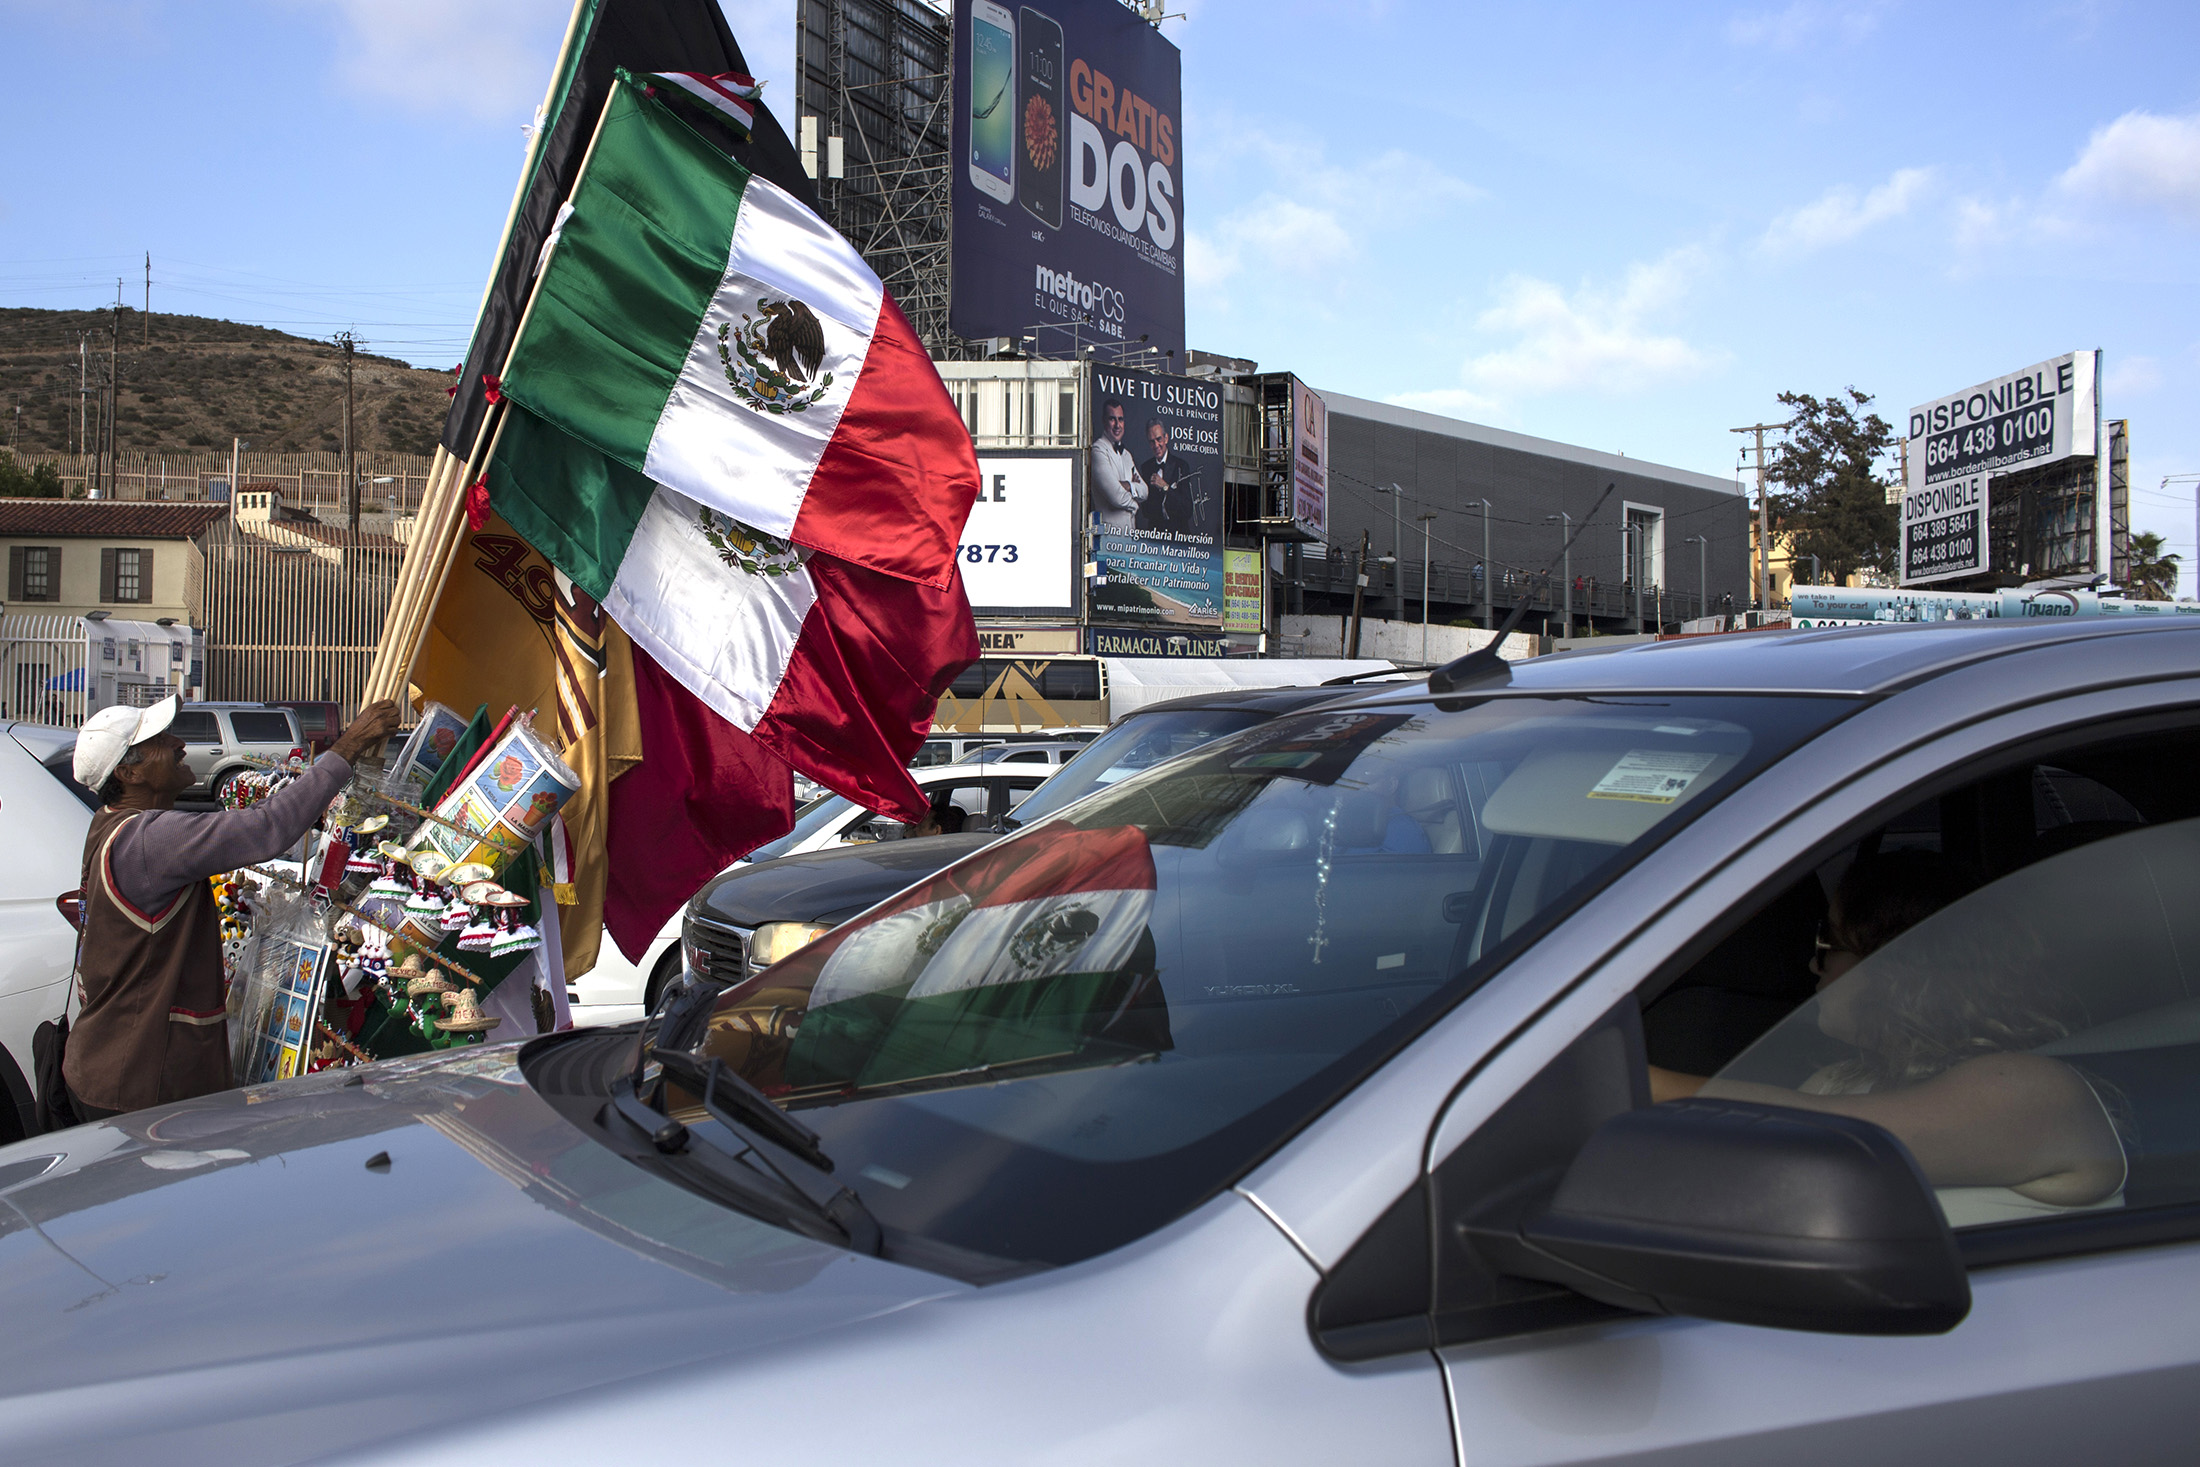 A street vendor sells flags and other wares as vehicles wait in line for re-entry into the United States of America on the Mexican side of the San Ysidro port of entry in Tijuana, Mexico, on Tuesday, June 7, 2016. The peso weakened, posting its biggest loss against the dollar on a closing basis in more than a month.
